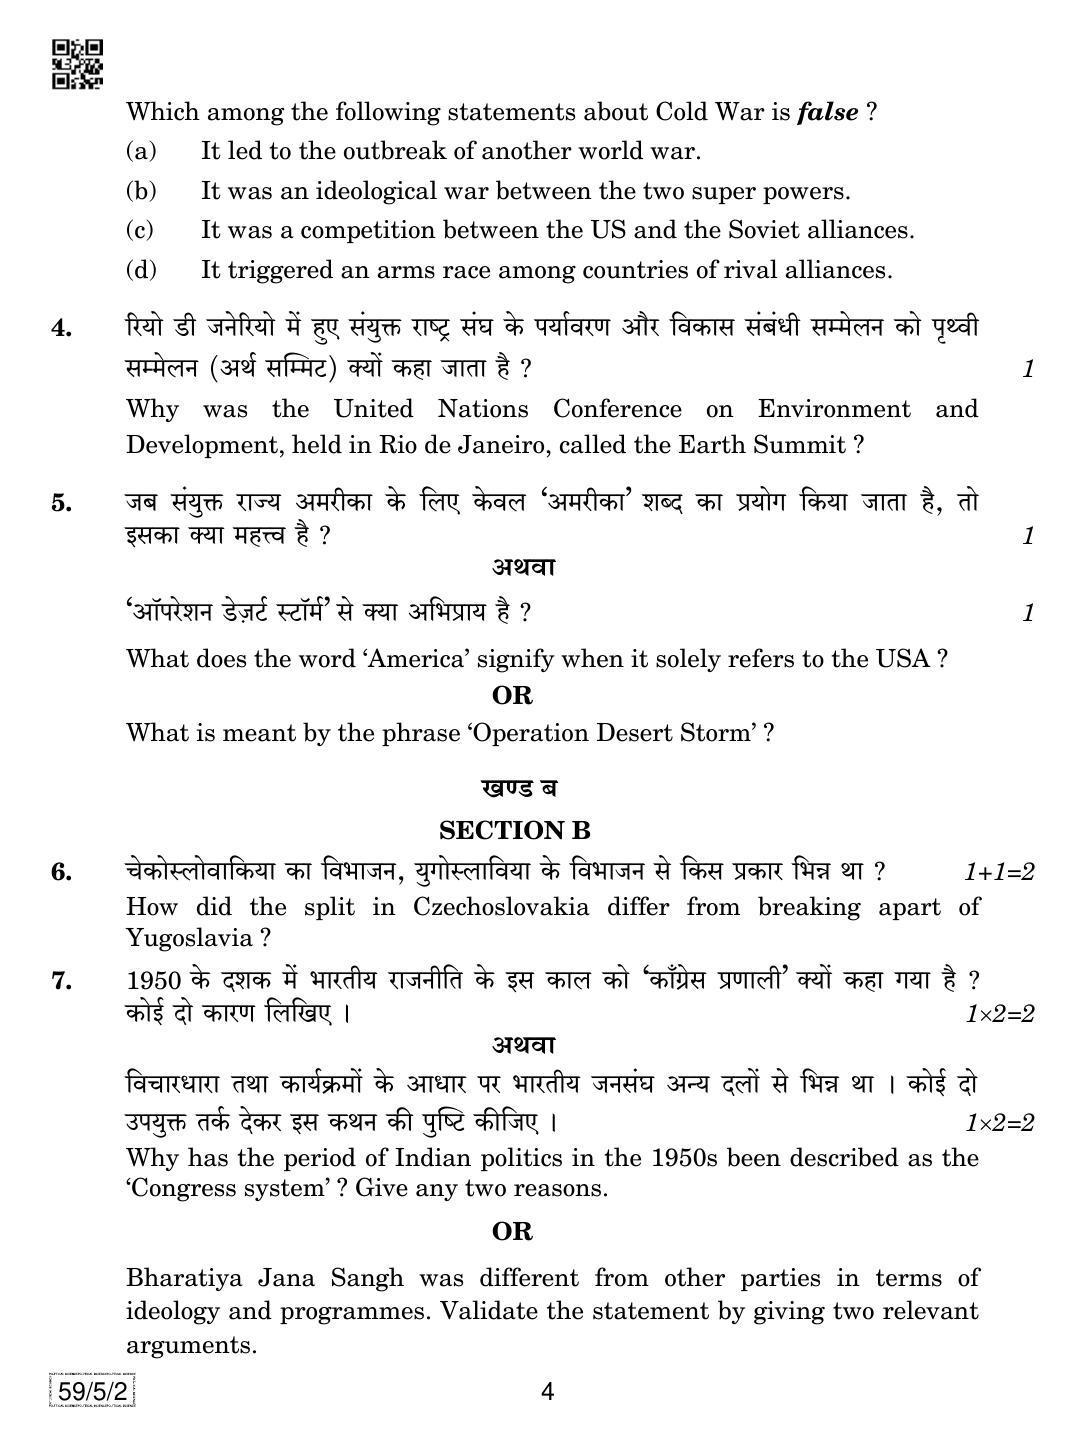 CBSE Class 12 59-5-2 Political Science 2019 Question Paper - Page 4